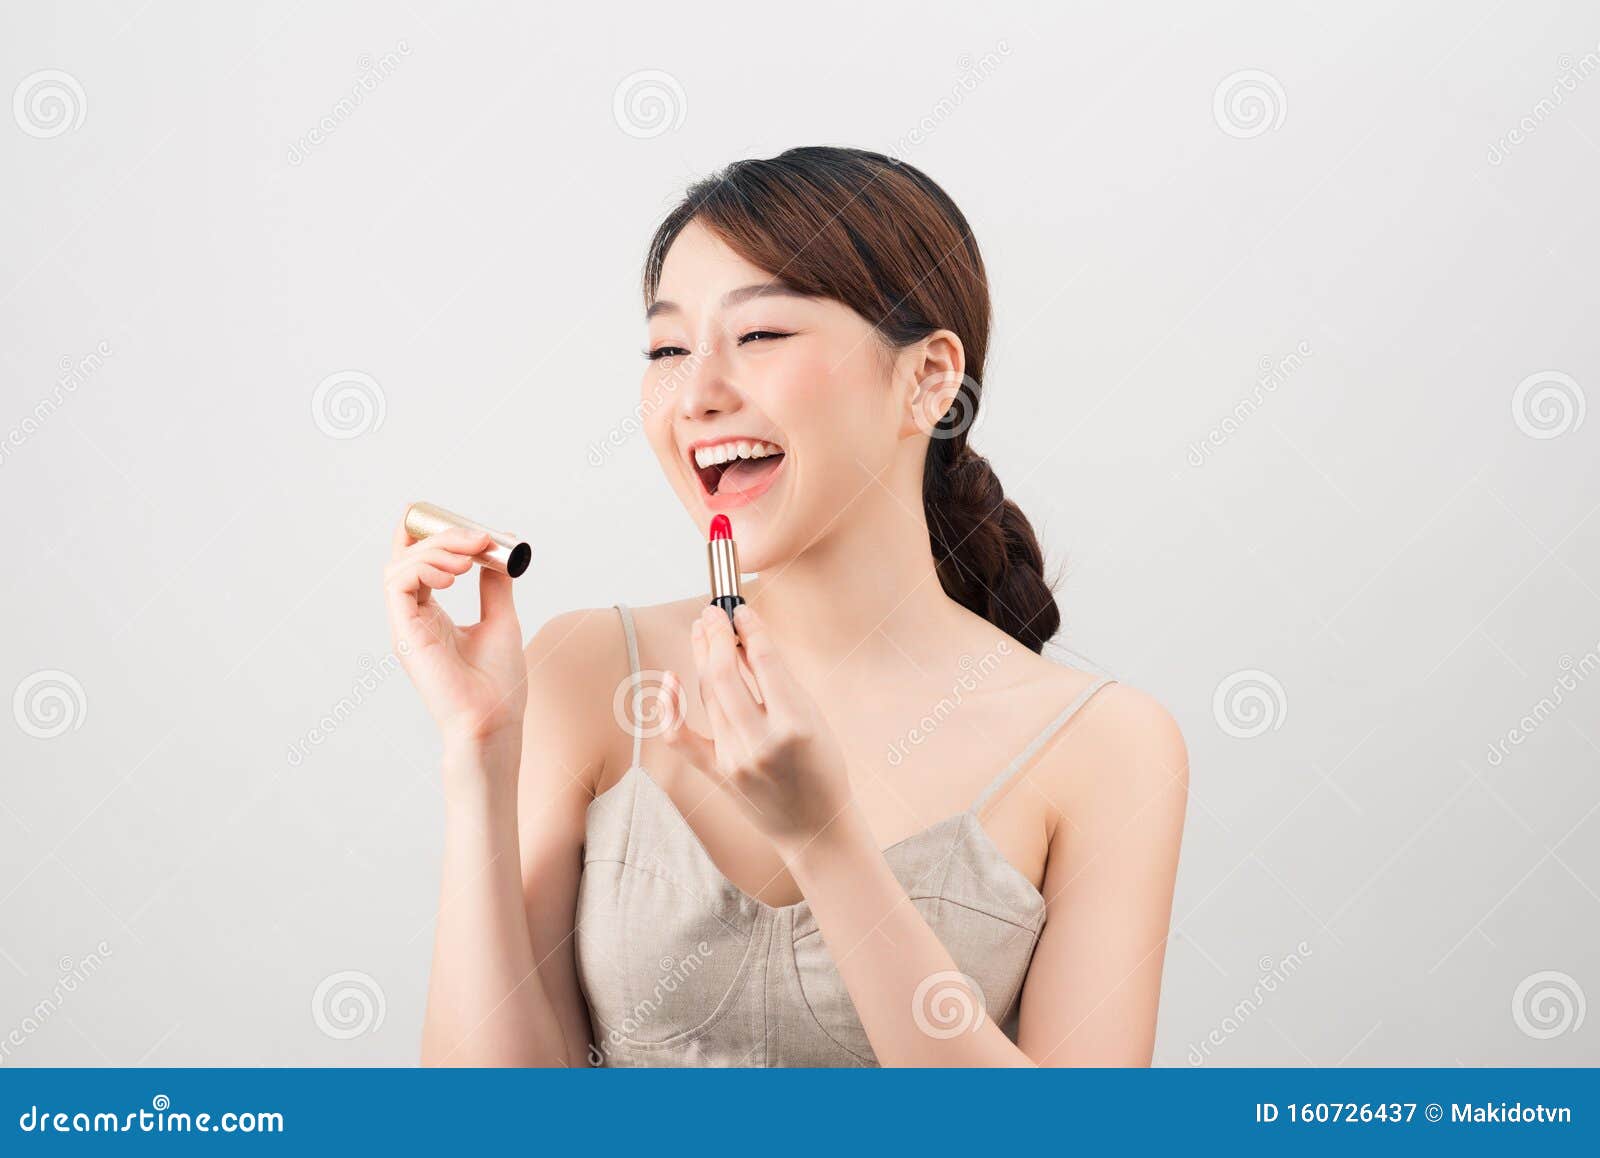 Photo Of A Beautiful Young Pretty Asian Woman With Healthy 